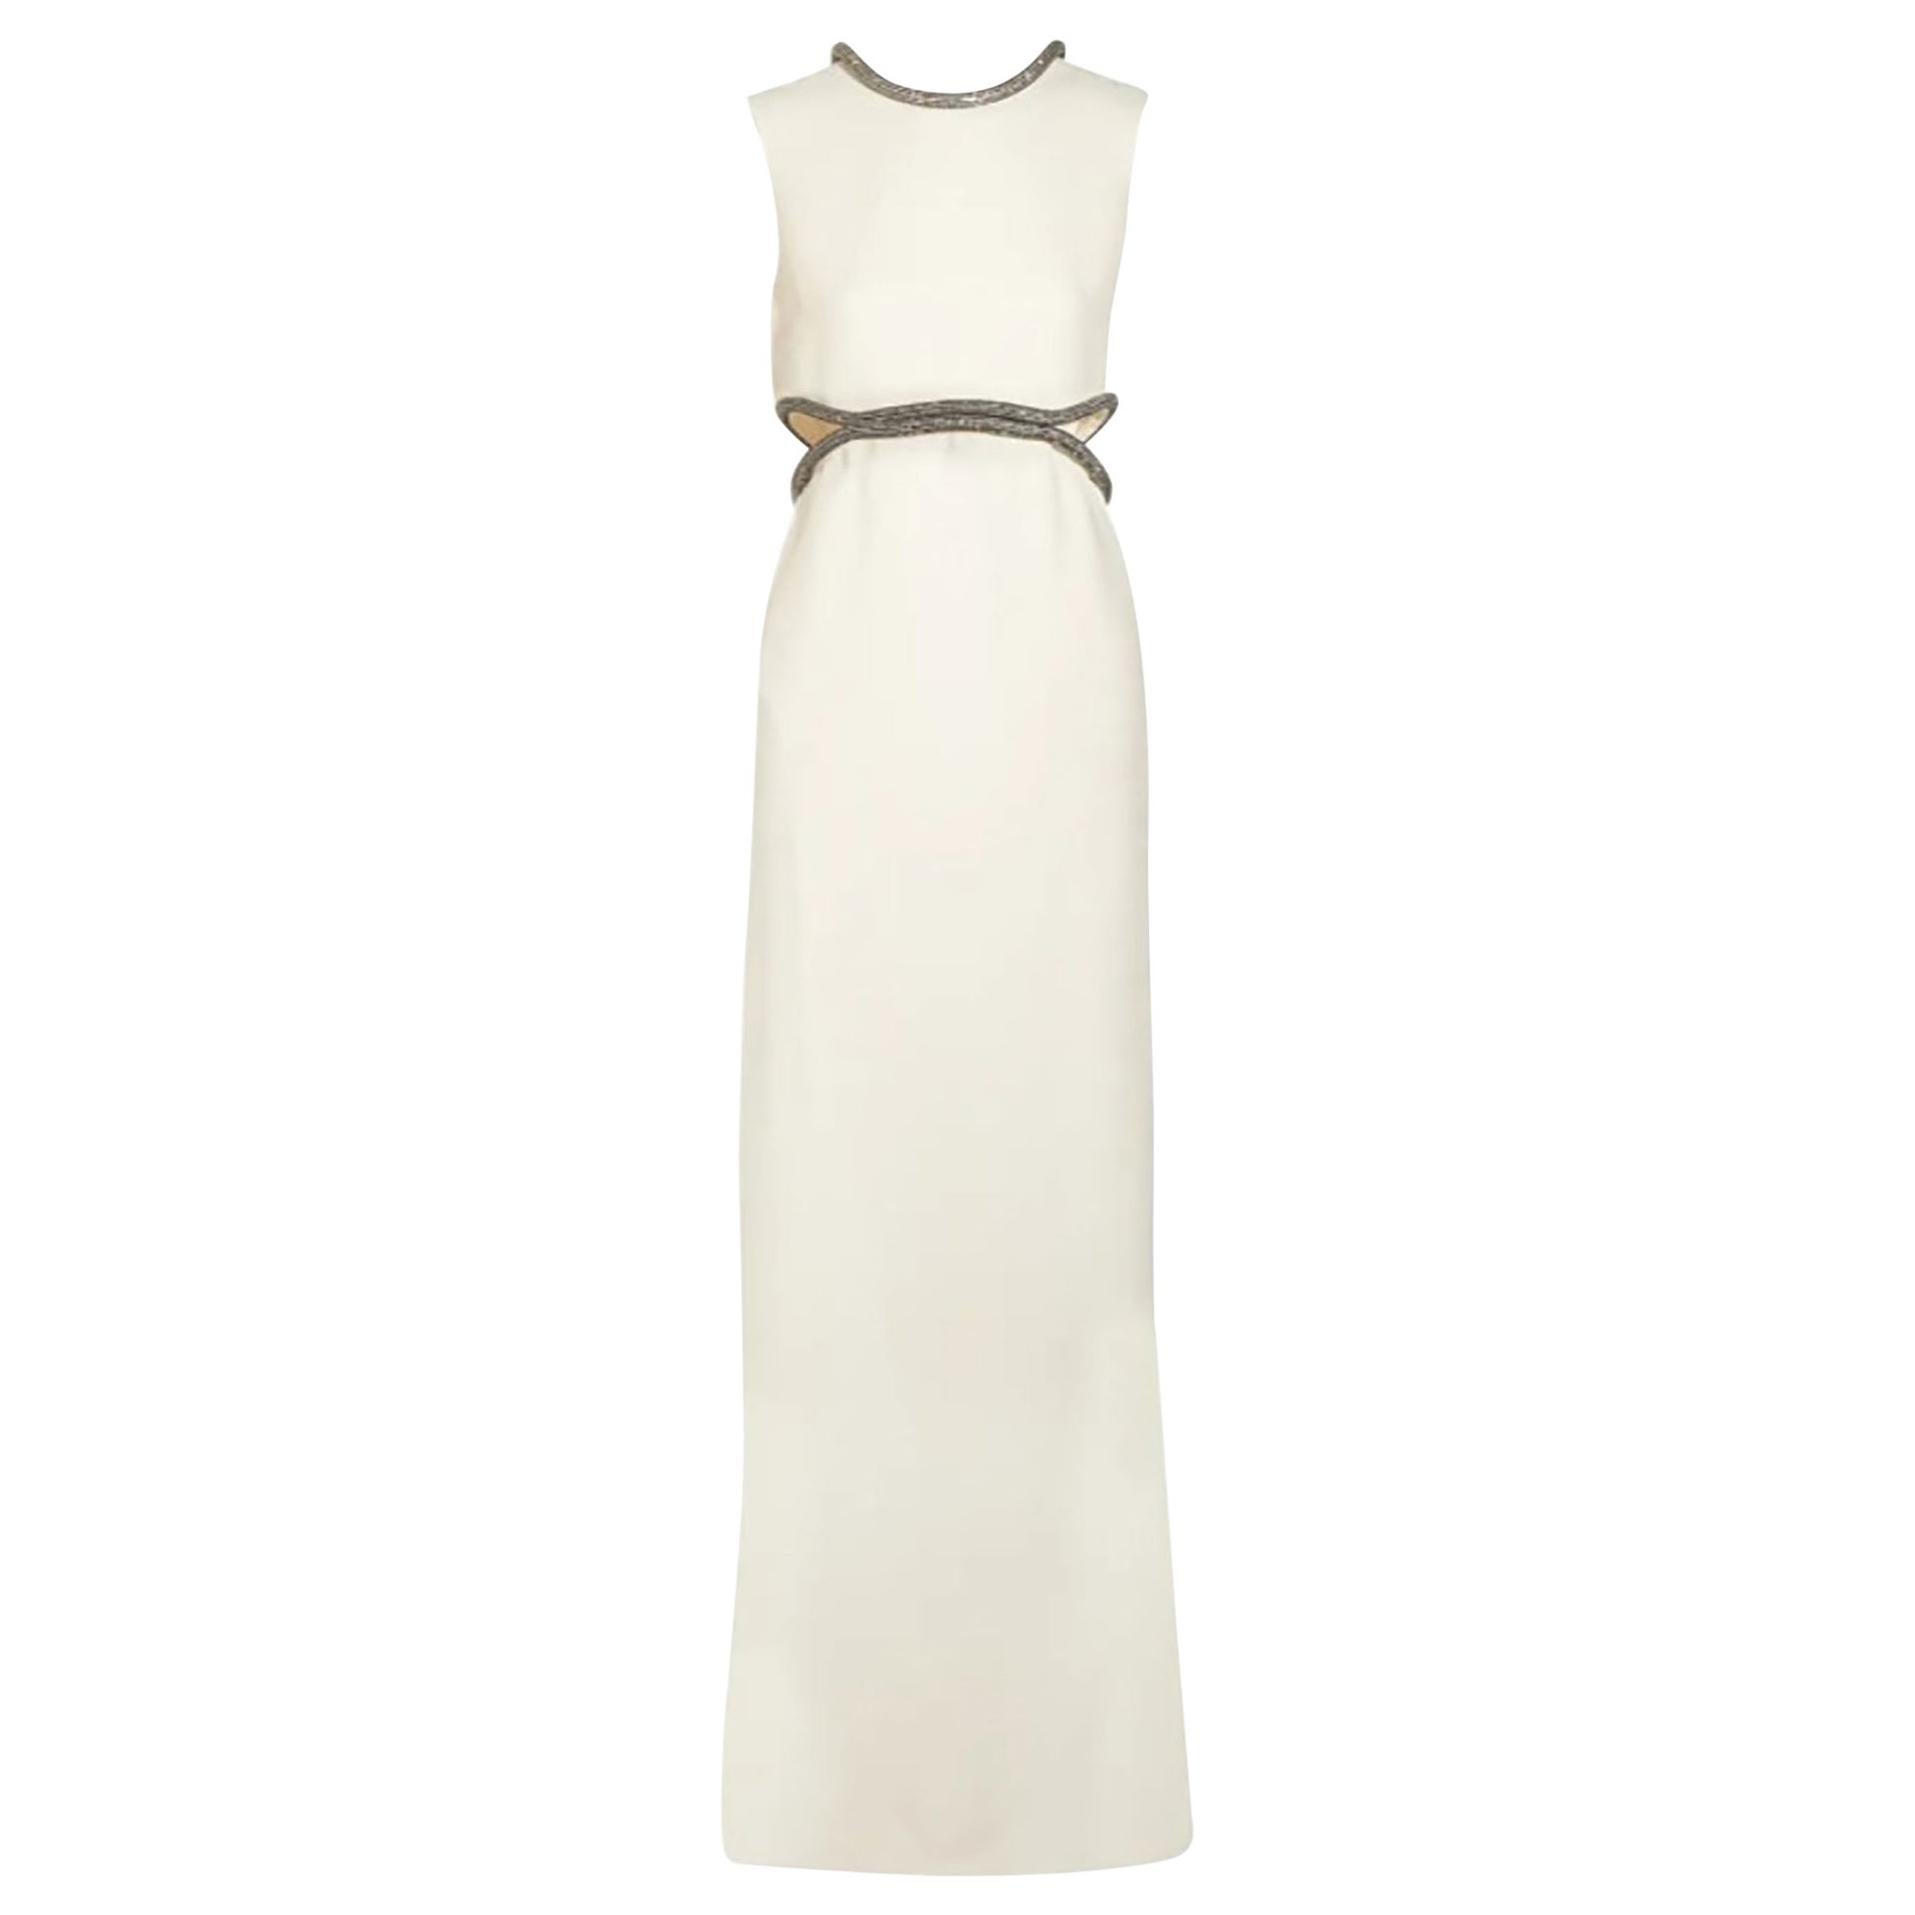 GUCCI CRYSTAL-EMBELLISHED WHITE SILK-CADY DRESS GOWN size IT 40